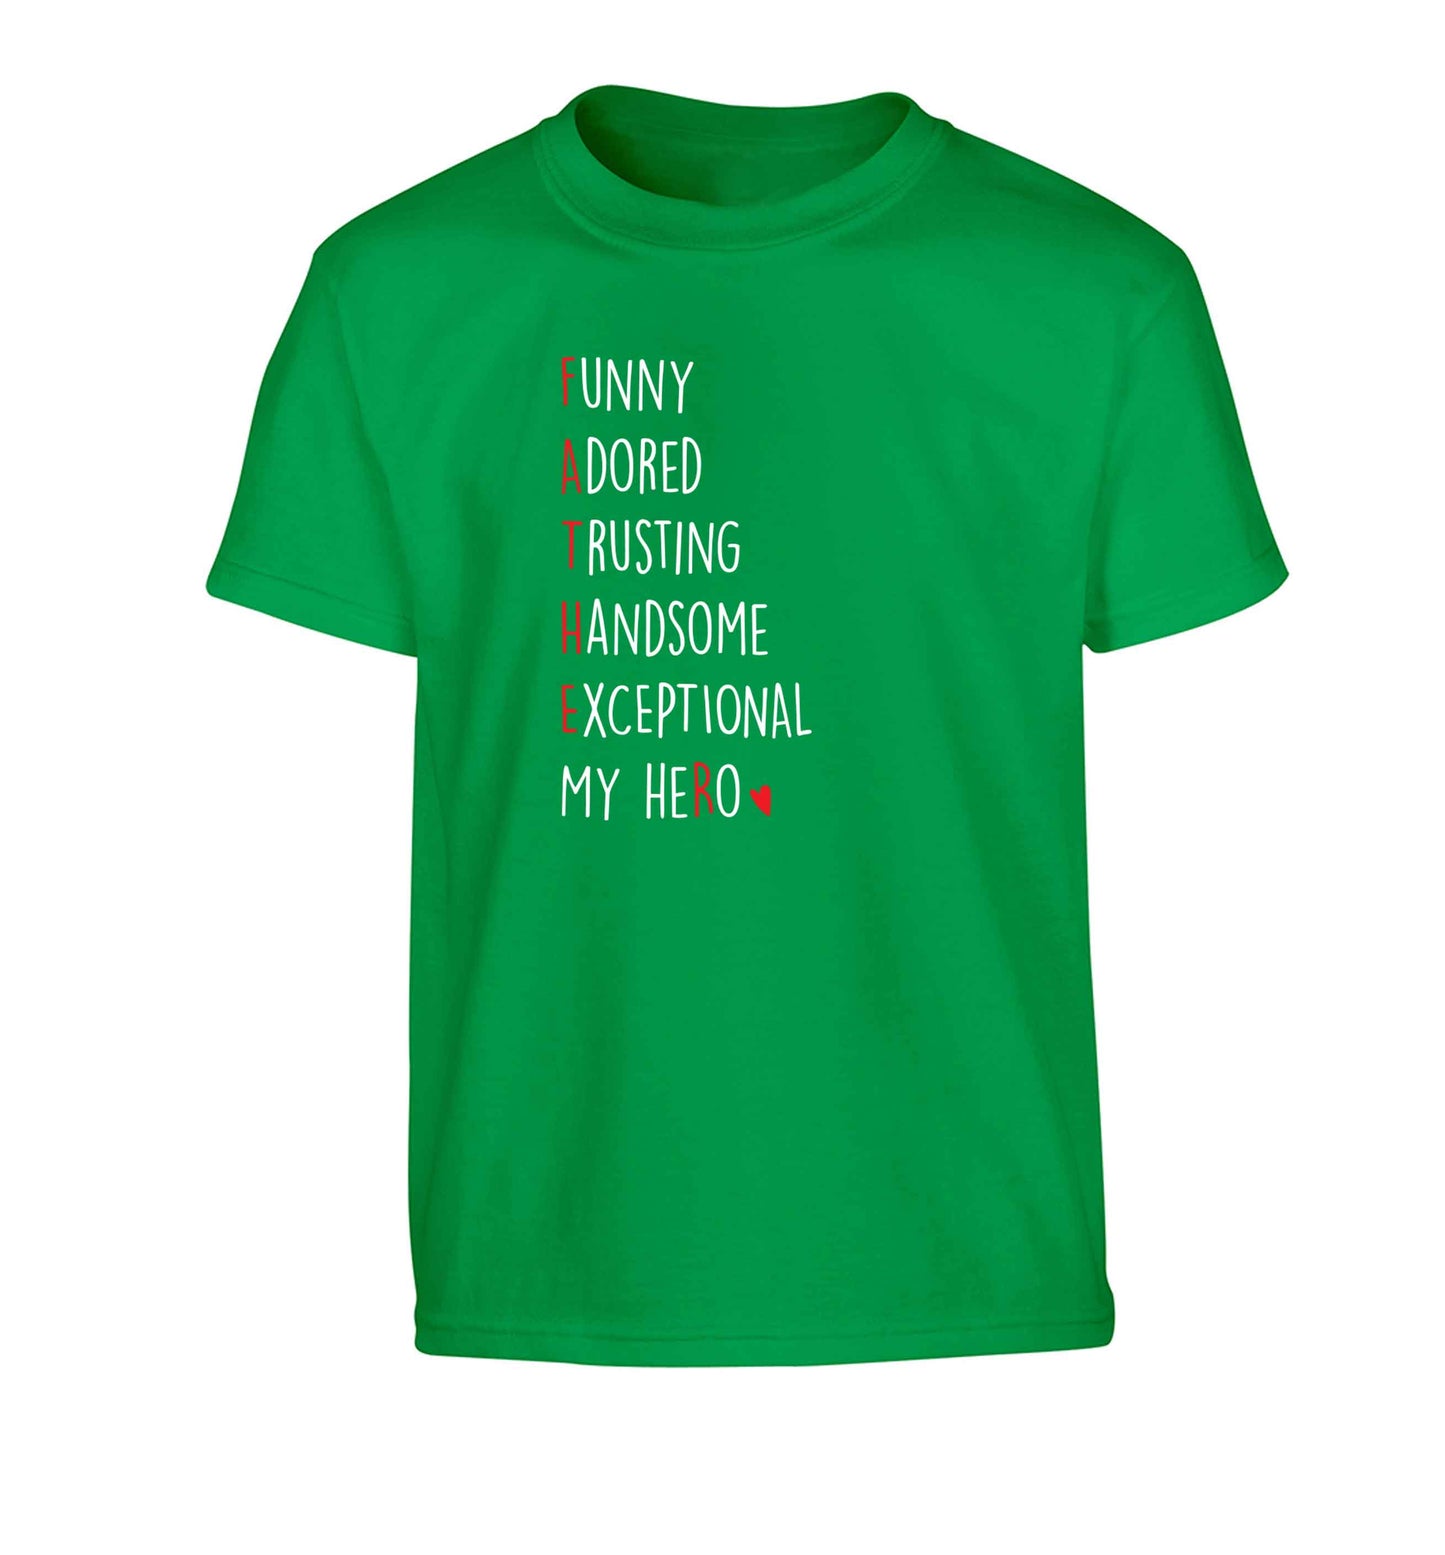 Father, funny adored trusting handsome exceptional my hero Children's green Tshirt 12-13 Years